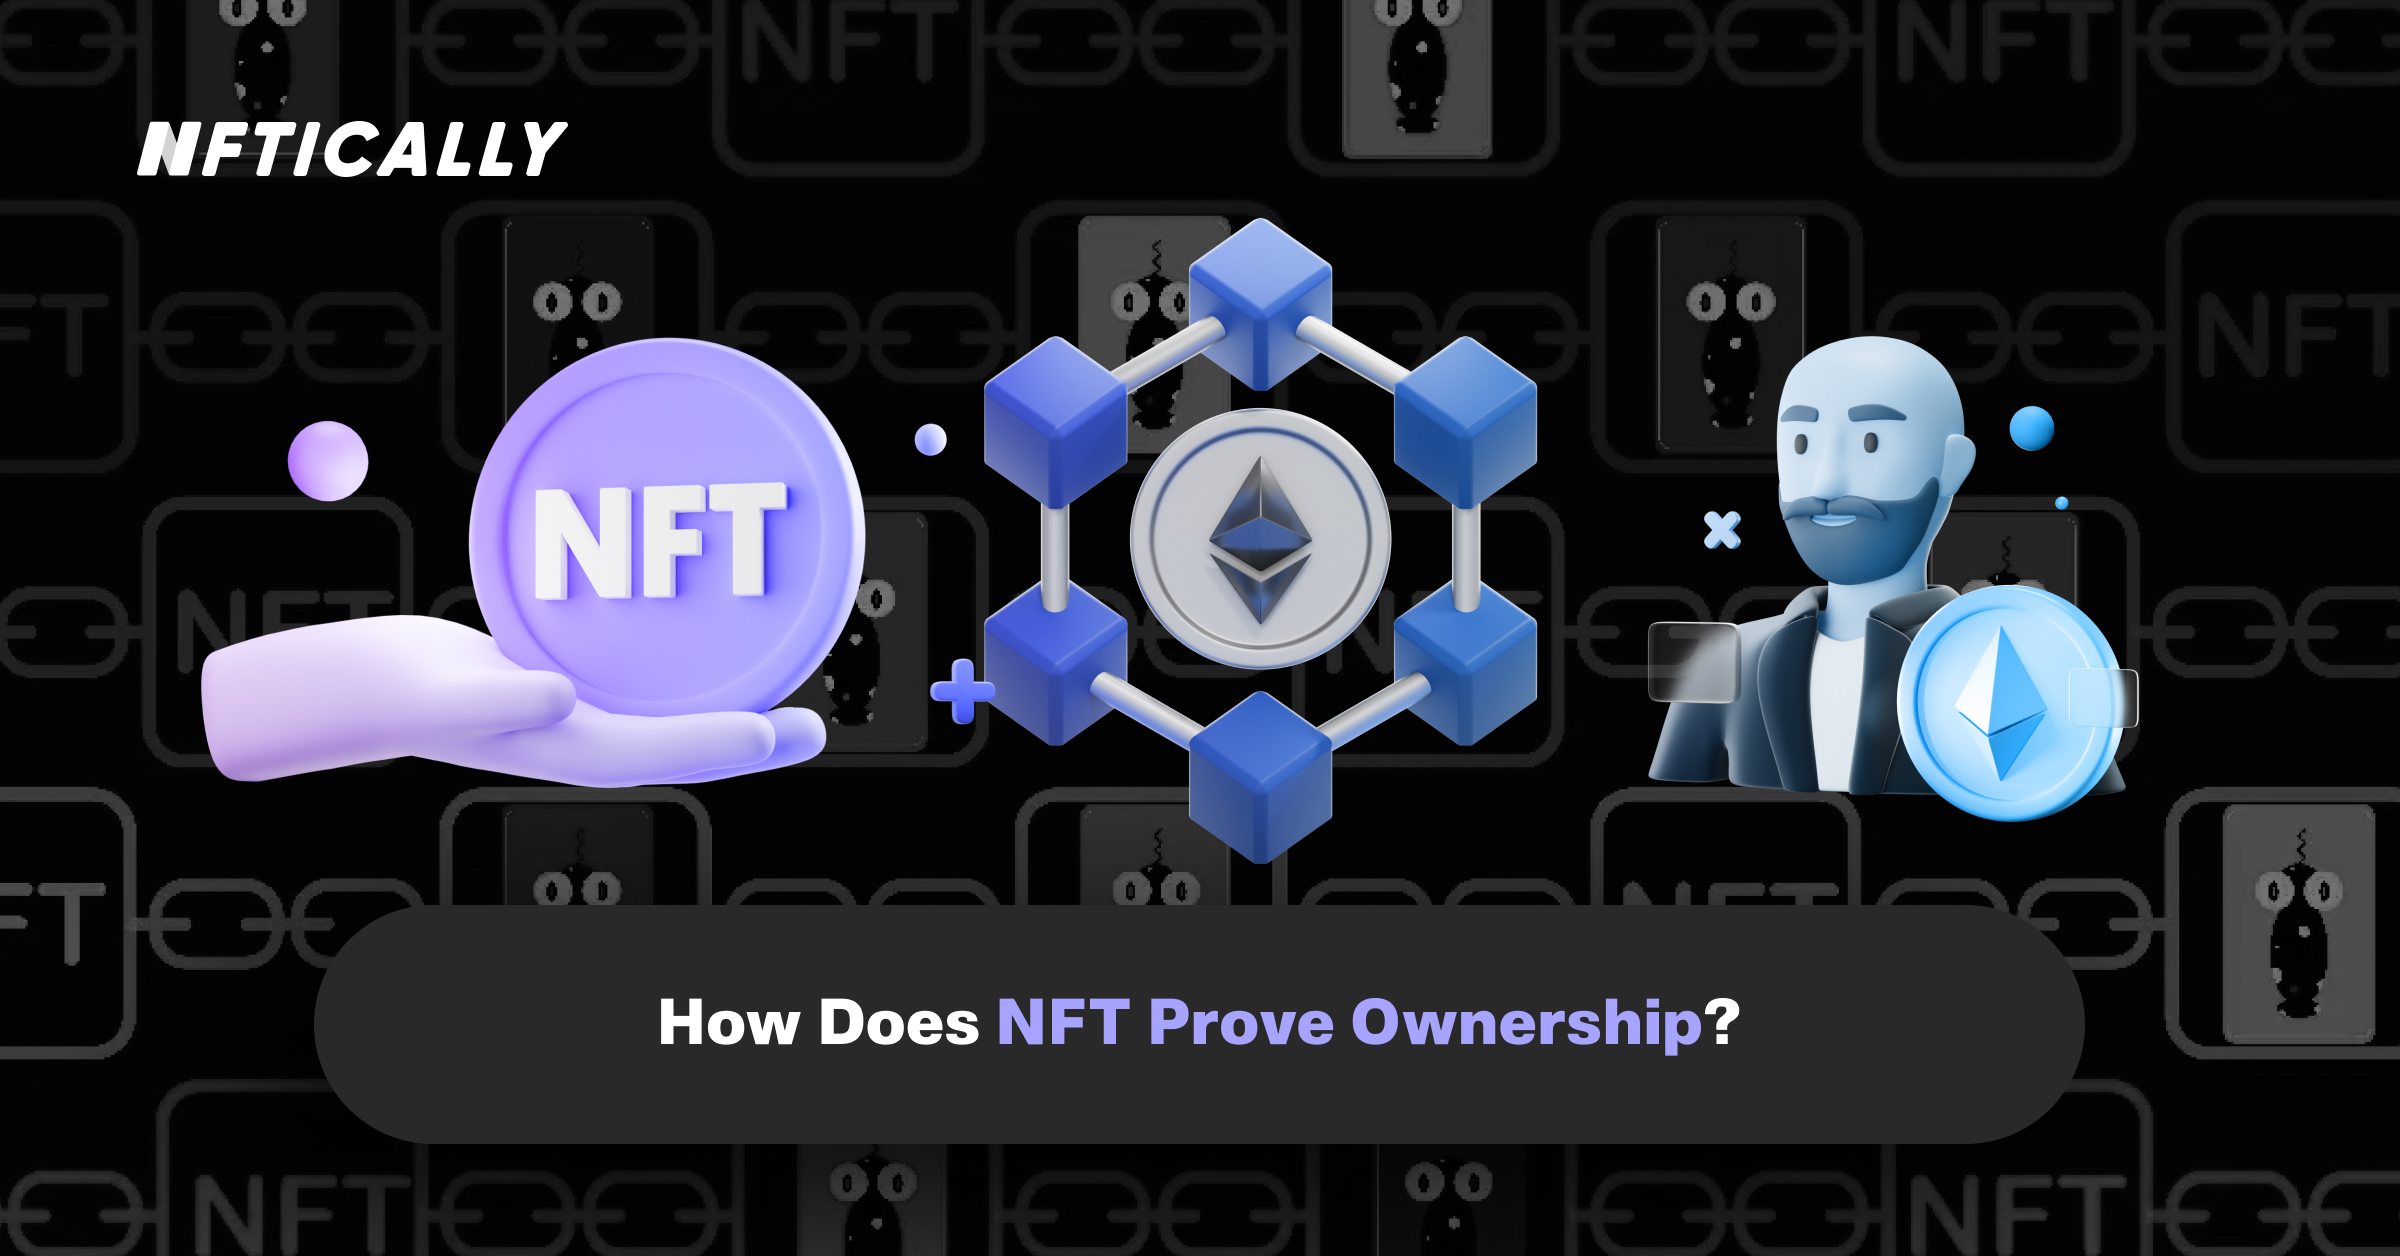 How Does NFT Prove Ownership